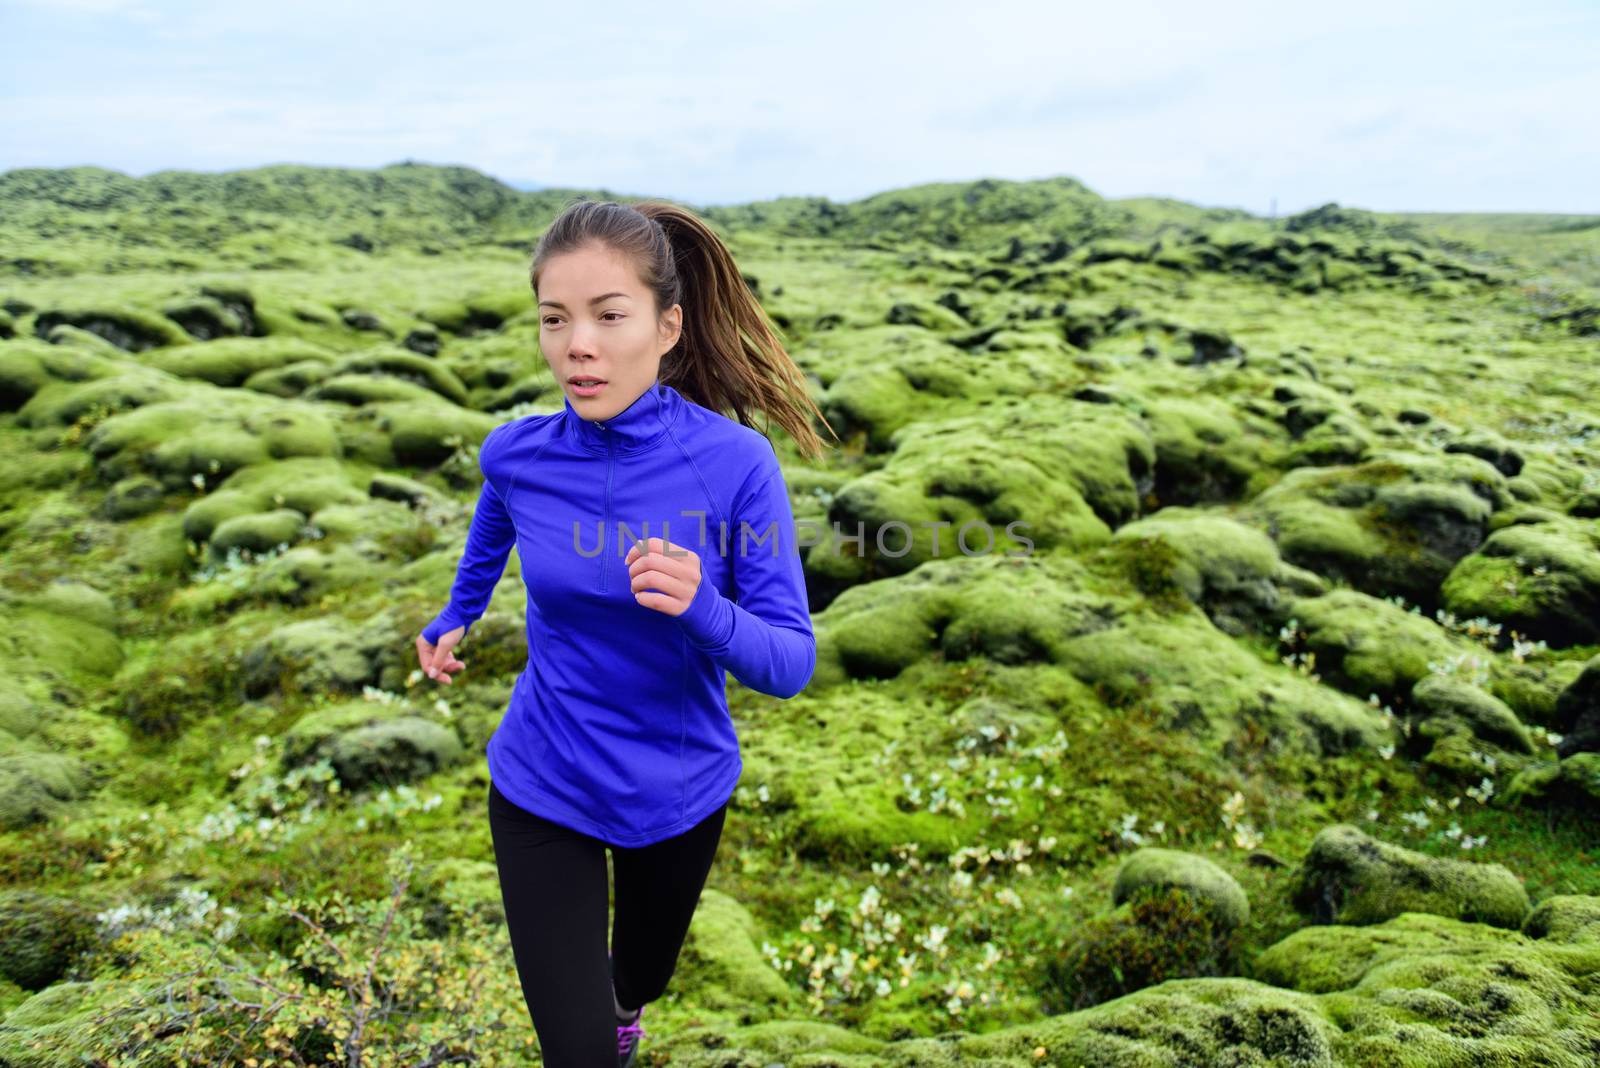 Athlete trail runner - running woman exercising. Fit female sport fitness model training jogging outdoors living healthy lifestyle in beautiful nature, Iceland.